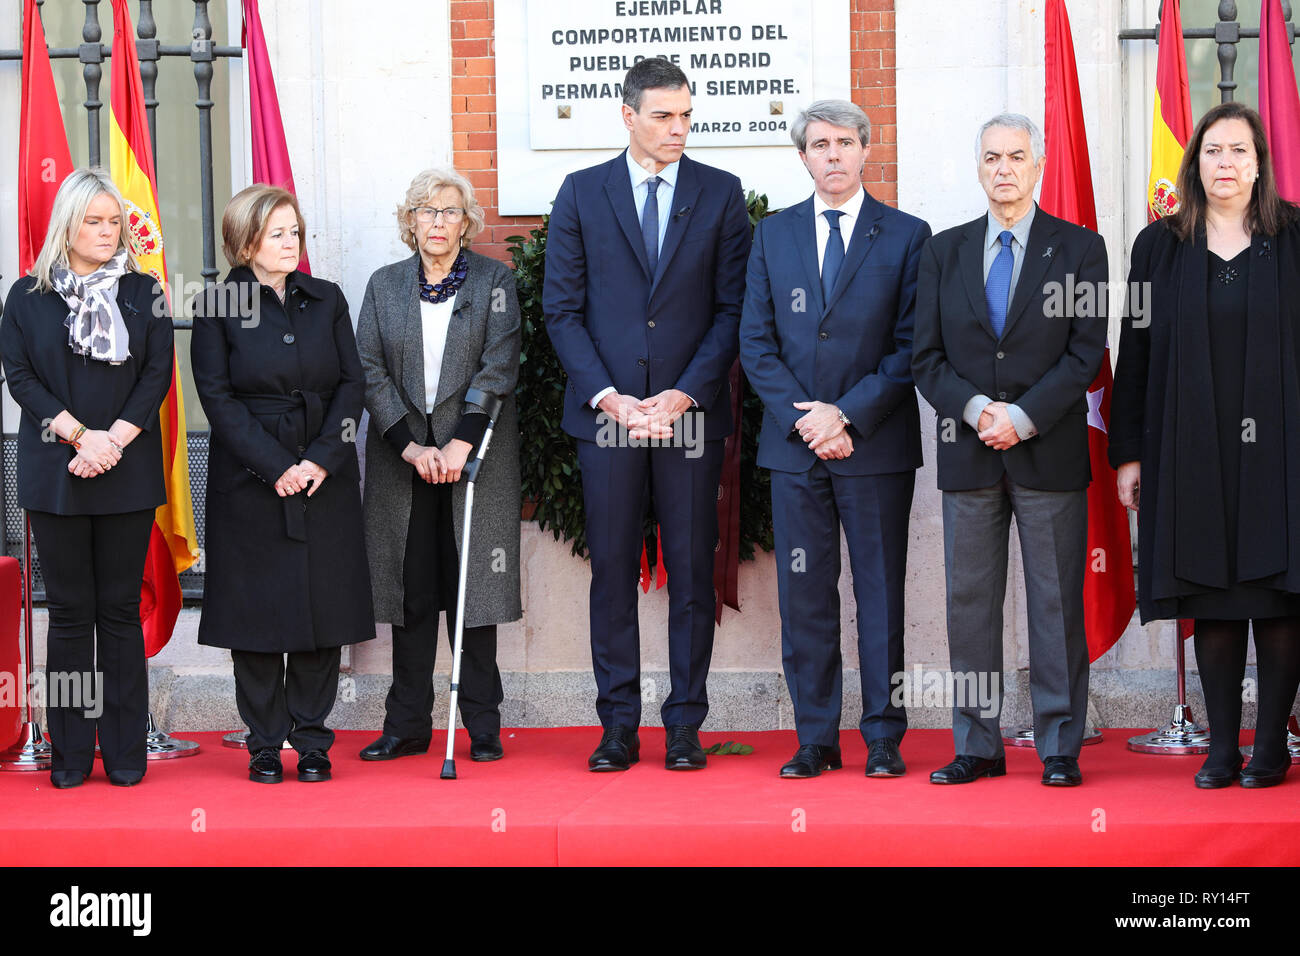 Madrid, Spain. 11th Mar, 2019. Angel Garrido(R), Pedro Sanchez(C), Manuela Carmena(L) and member of the foundations AVT seen attending the floral offering in the event of tribute to the victims of the 11M. Credit: Jesús Hellin/Alamy Live News Stock Photo